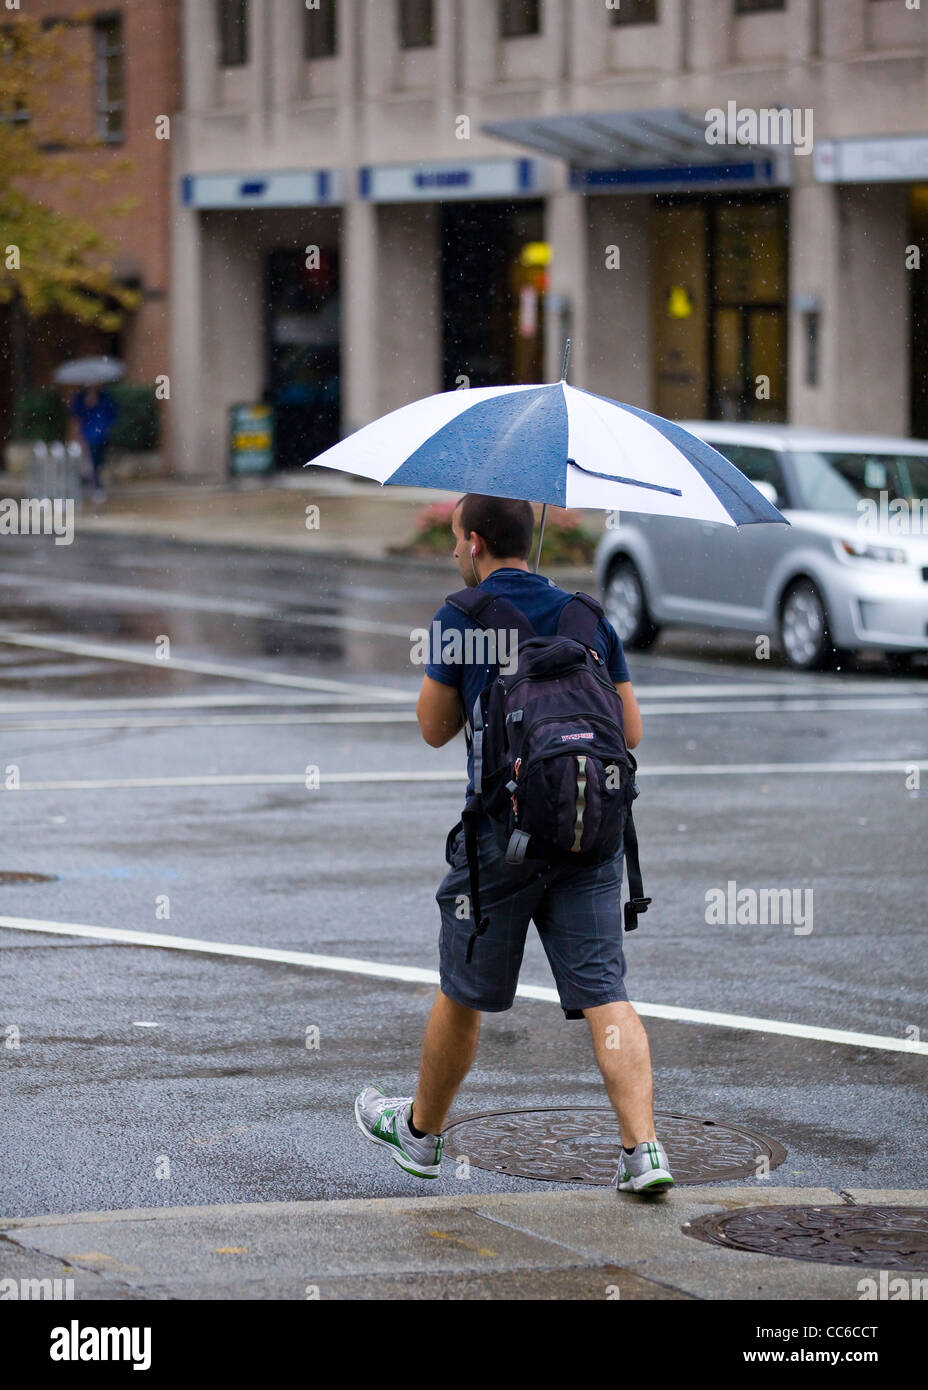 A young man crossing the street holding an umbrella on a rainy day Stock Photo